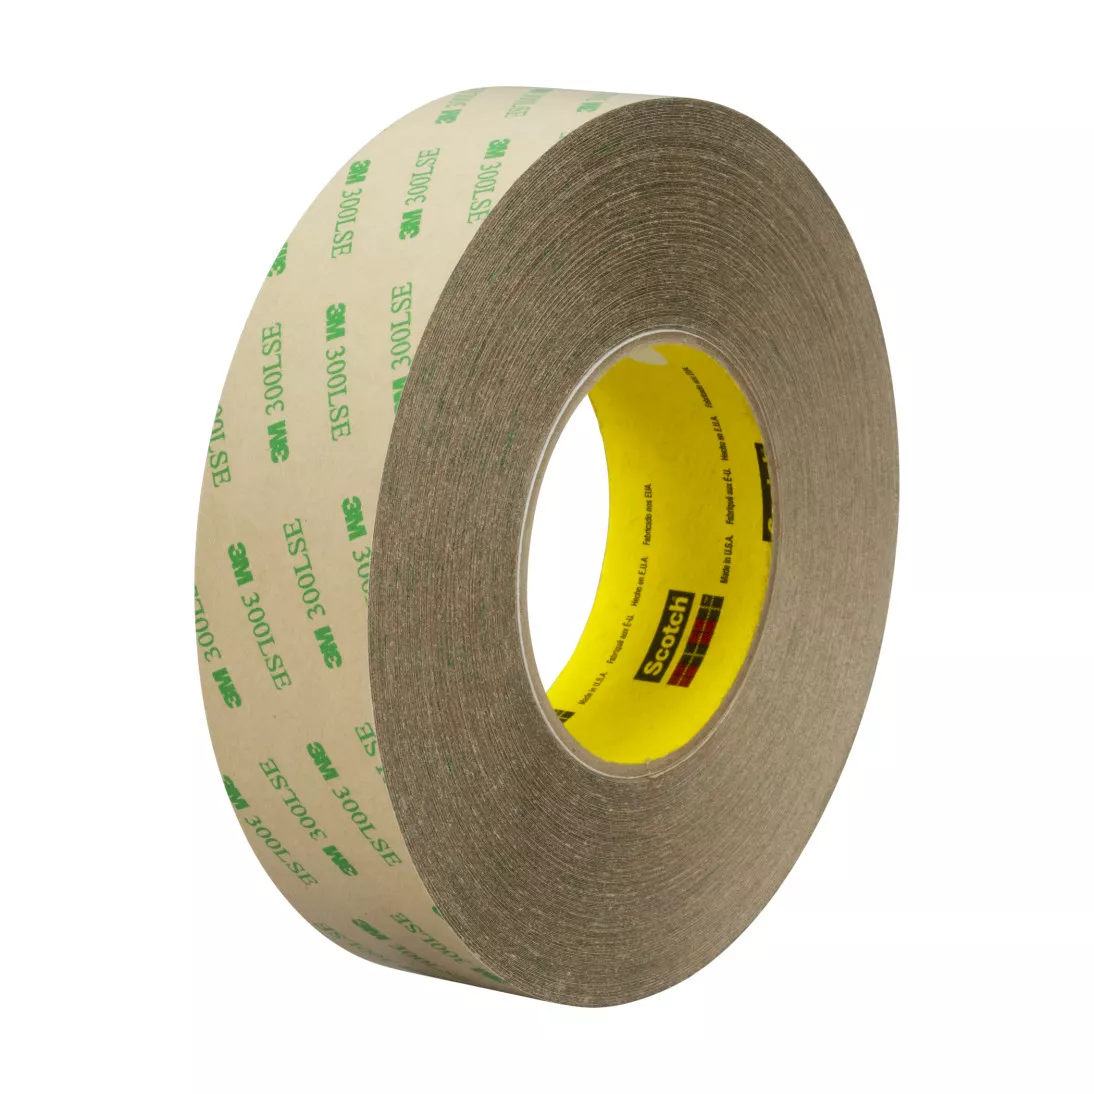 3M™ Adhesive Transfer Tape 9672LE, Clear, 12 in x 180 yd, 5 mil, 1 roll
per case